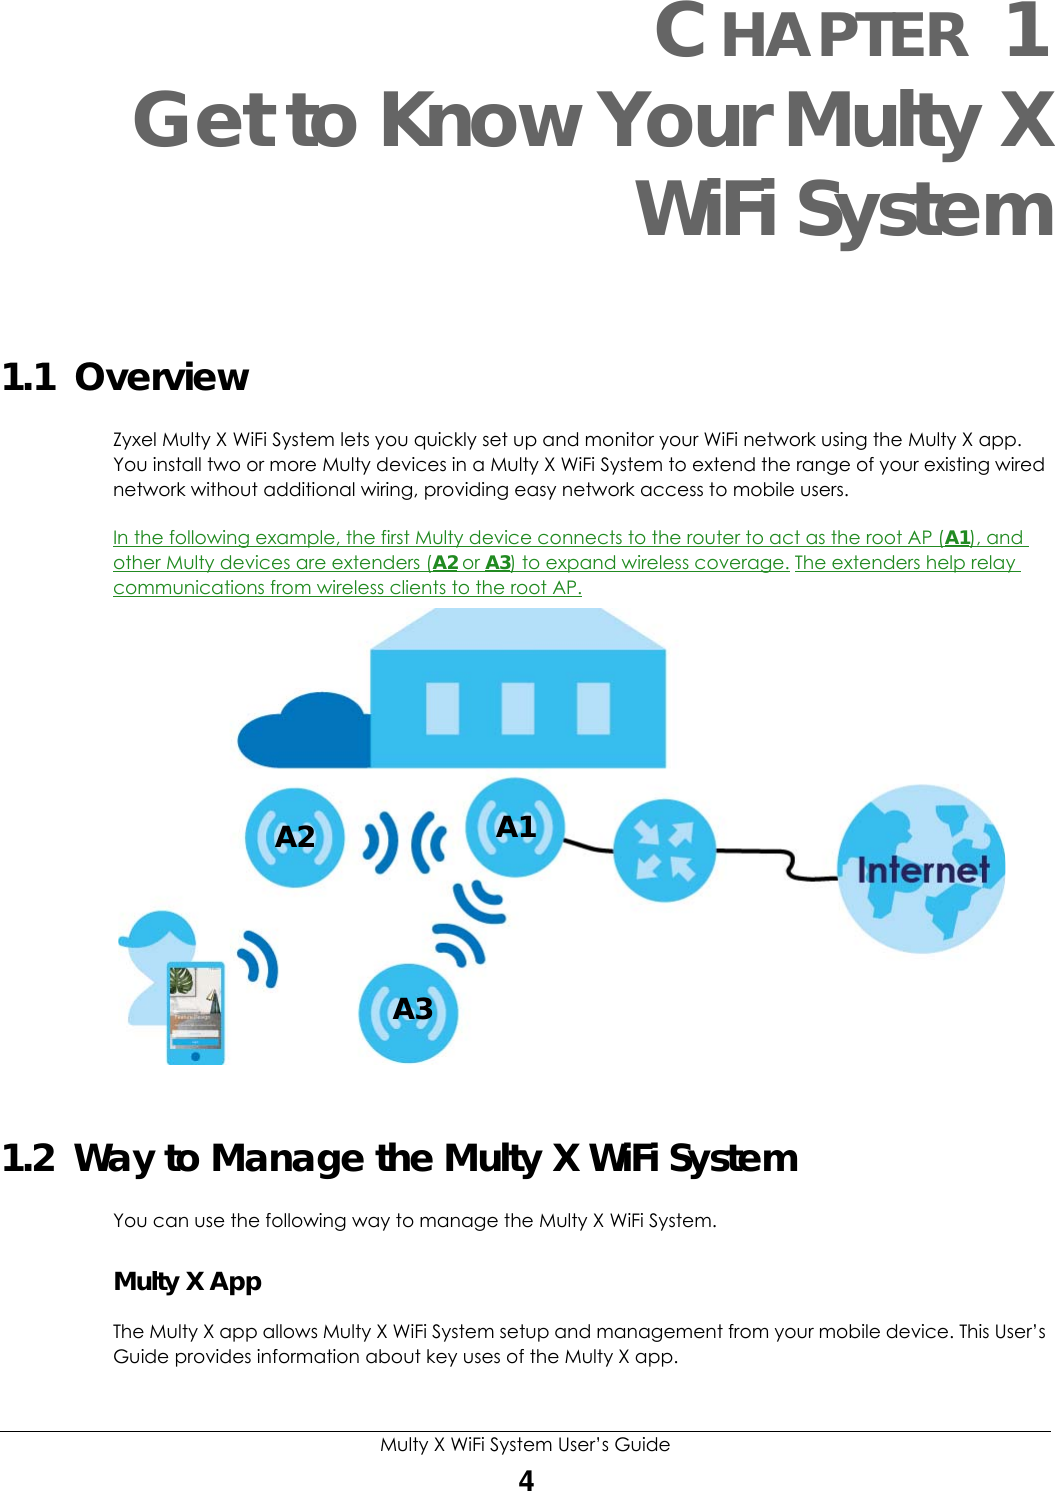 Multy X WiFi System User’s Guide4CHAPTER 1Get to Know Your Multy XWiFi System1.1  Overview Zyxel Multy X WiFi System lets you quickly set up and monitor your WiFi network using the Multy X app. You install two or more Multy devices in a Multy X WiFi System to extend the range of your existing wired network without additional wiring, providing easy network access to mobile users.In the following example, the first Multy device connects to the router to act as the root AP (A1), and other Multy devices are extenders (A2 or A3) to expand wireless coverage. The extenders help relay communications from wireless clients to the root AP.  1.2  Way to Manage the Multy X WiFi SystemYou can use the following way to manage the Multy X WiFi System.Multy X AppThe Multy X app allows Multy X WiFi System setup and management from your mobile device. This User’s Guide provides information about key uses of the Multy X app.A2 A1A3